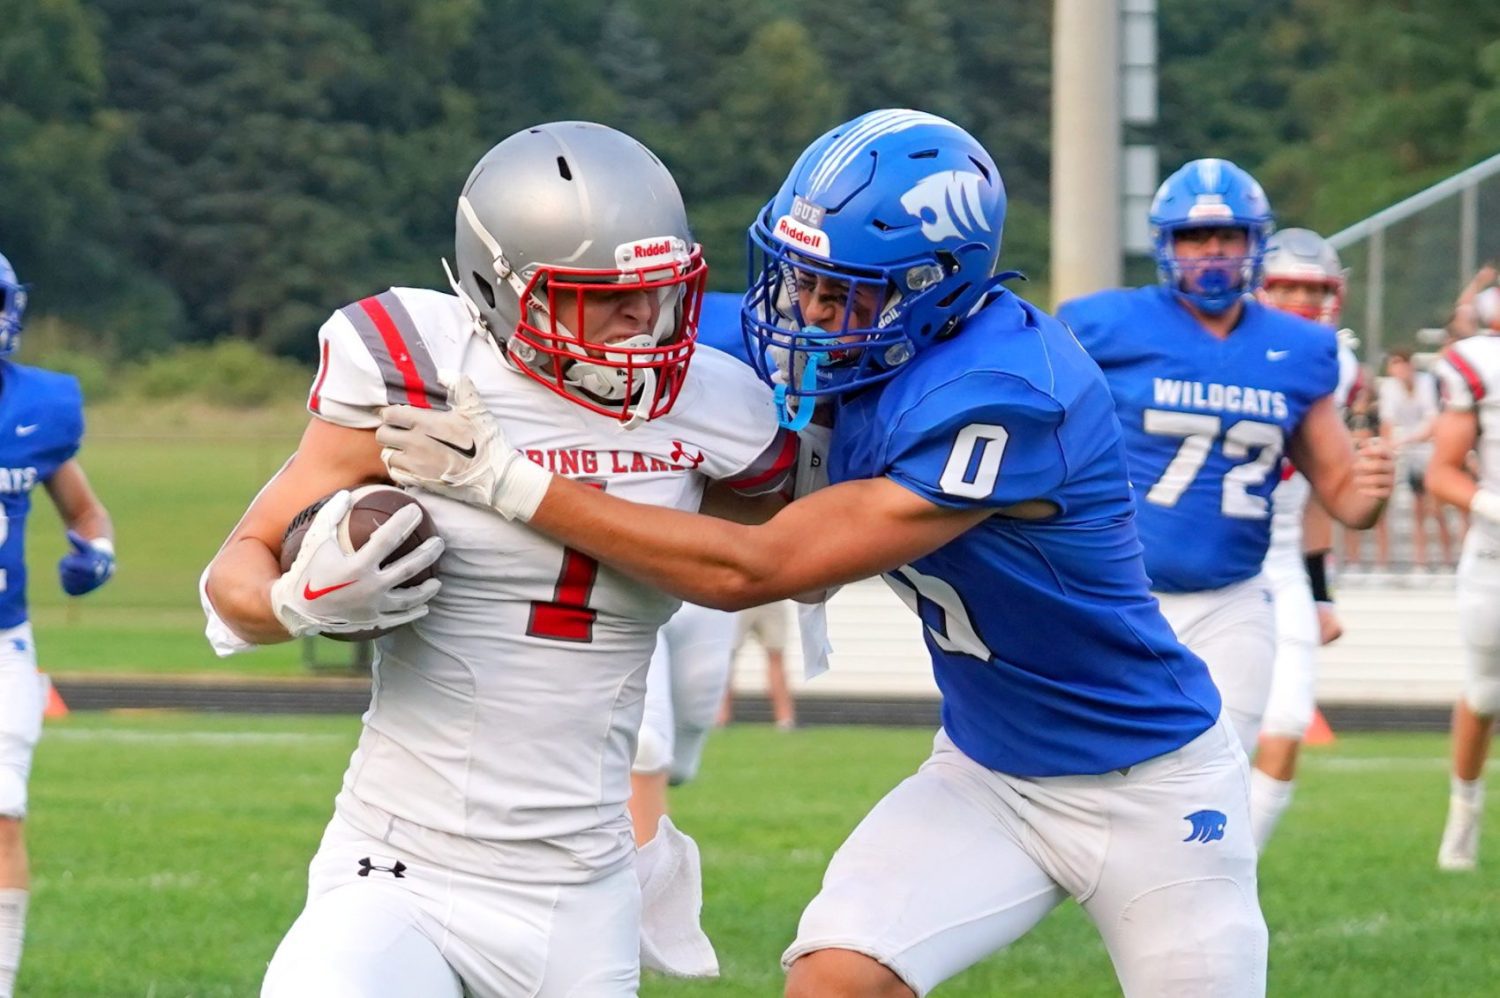 Grimmer-led Spring Lake gets by Montague 34-28 in season opener